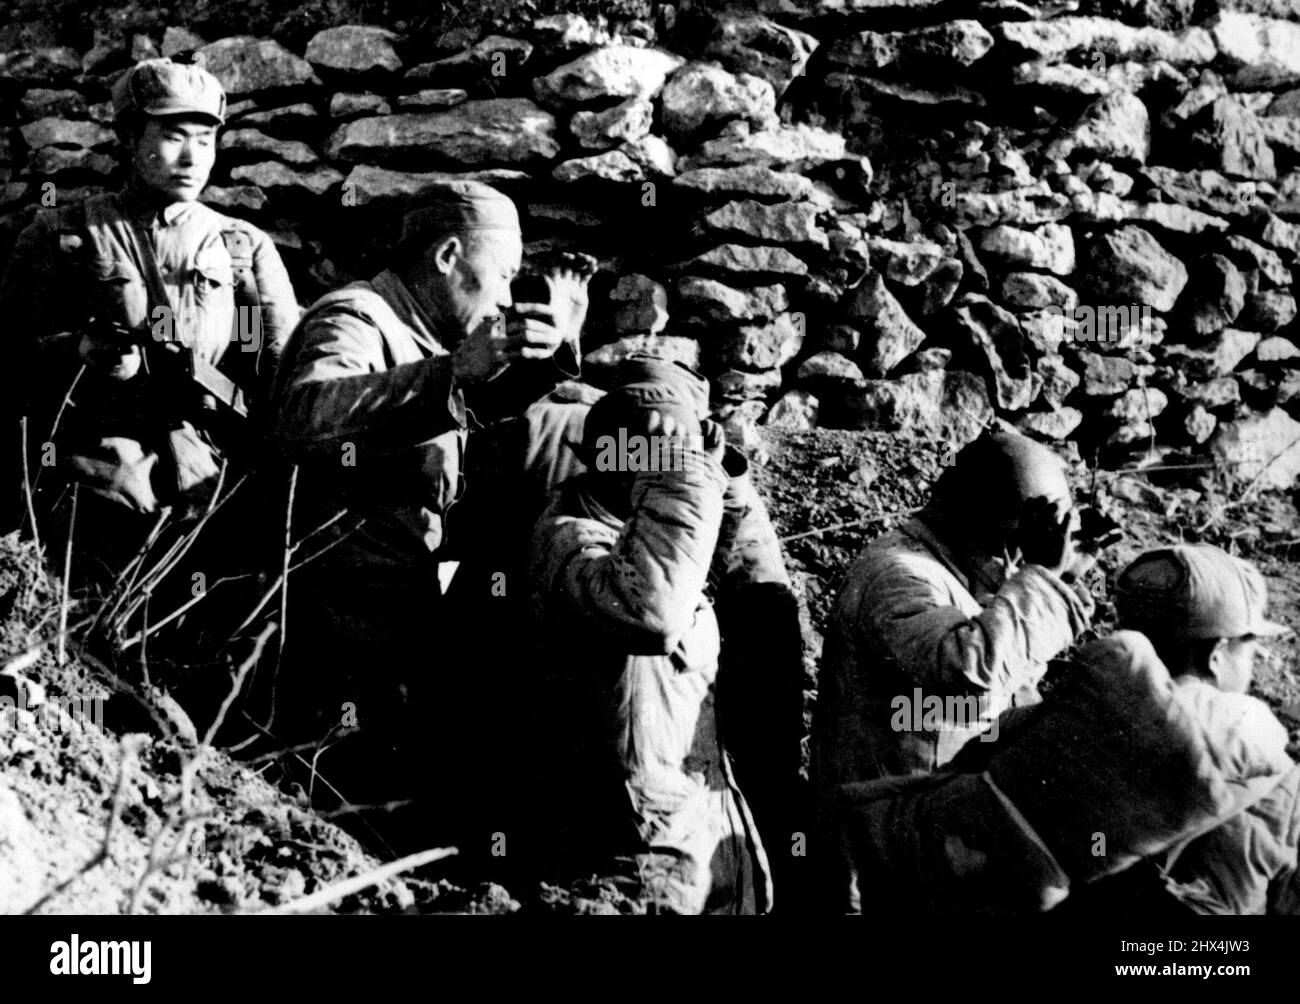 Capture of Yi Kiang Shan - Chinese 'Liberation Army' troops stormed and captured the nationalist held island of Yi Kiang Shan, one of the Tachen group, on Jan 18 in a sudden assault supported by naval and air forces. According to Communist sources in Peiping this nationalist soldiers leaving one of their bunkers after the Island surrendered. A Chinese Communist soldier covers them at pistol point. March 23, 1955. Stock Photo